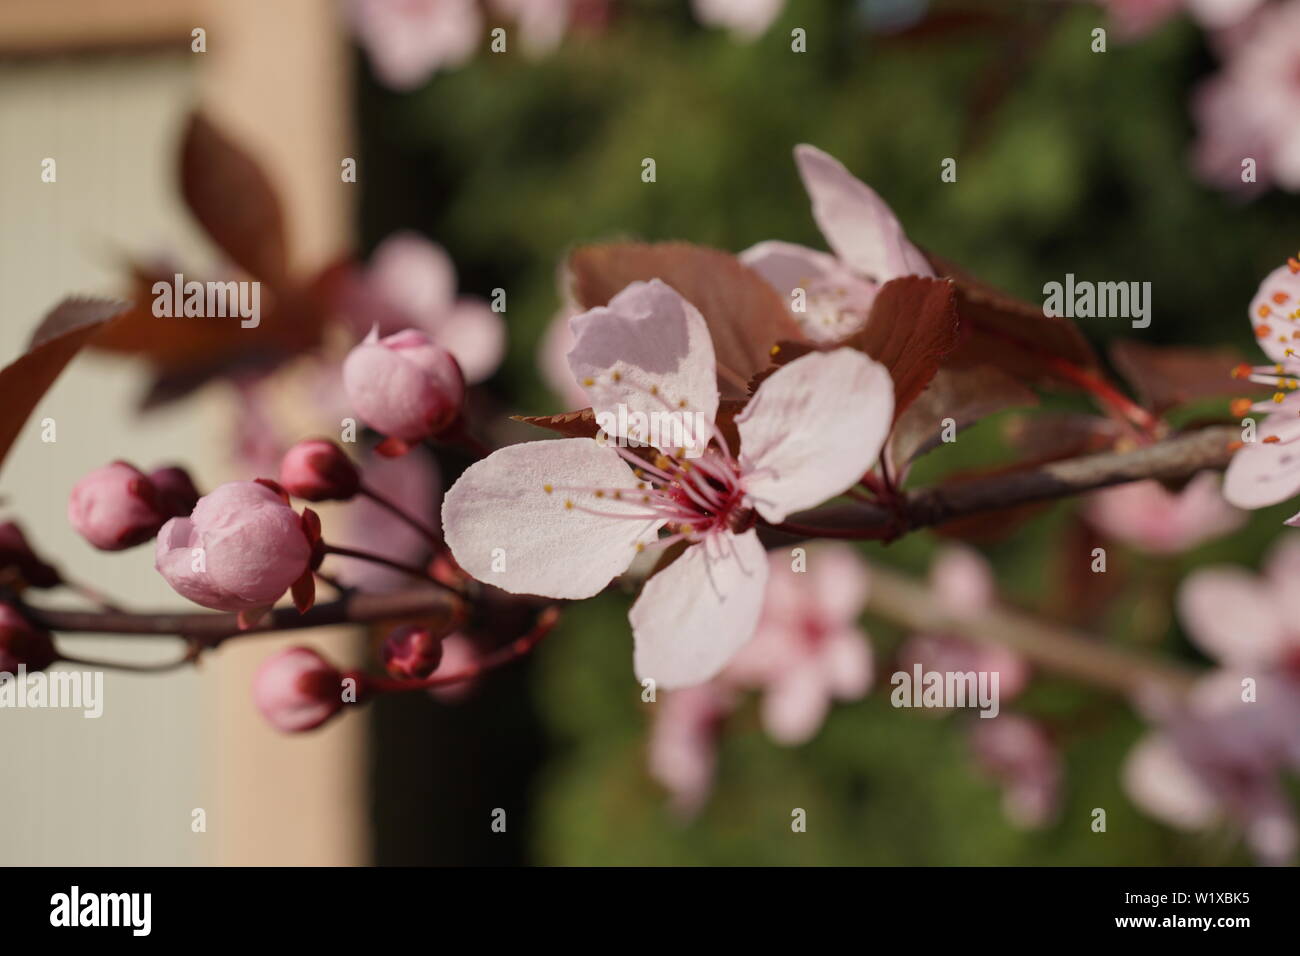 Springs beautiful cherry blossoms in warm and cold light Stock Photo